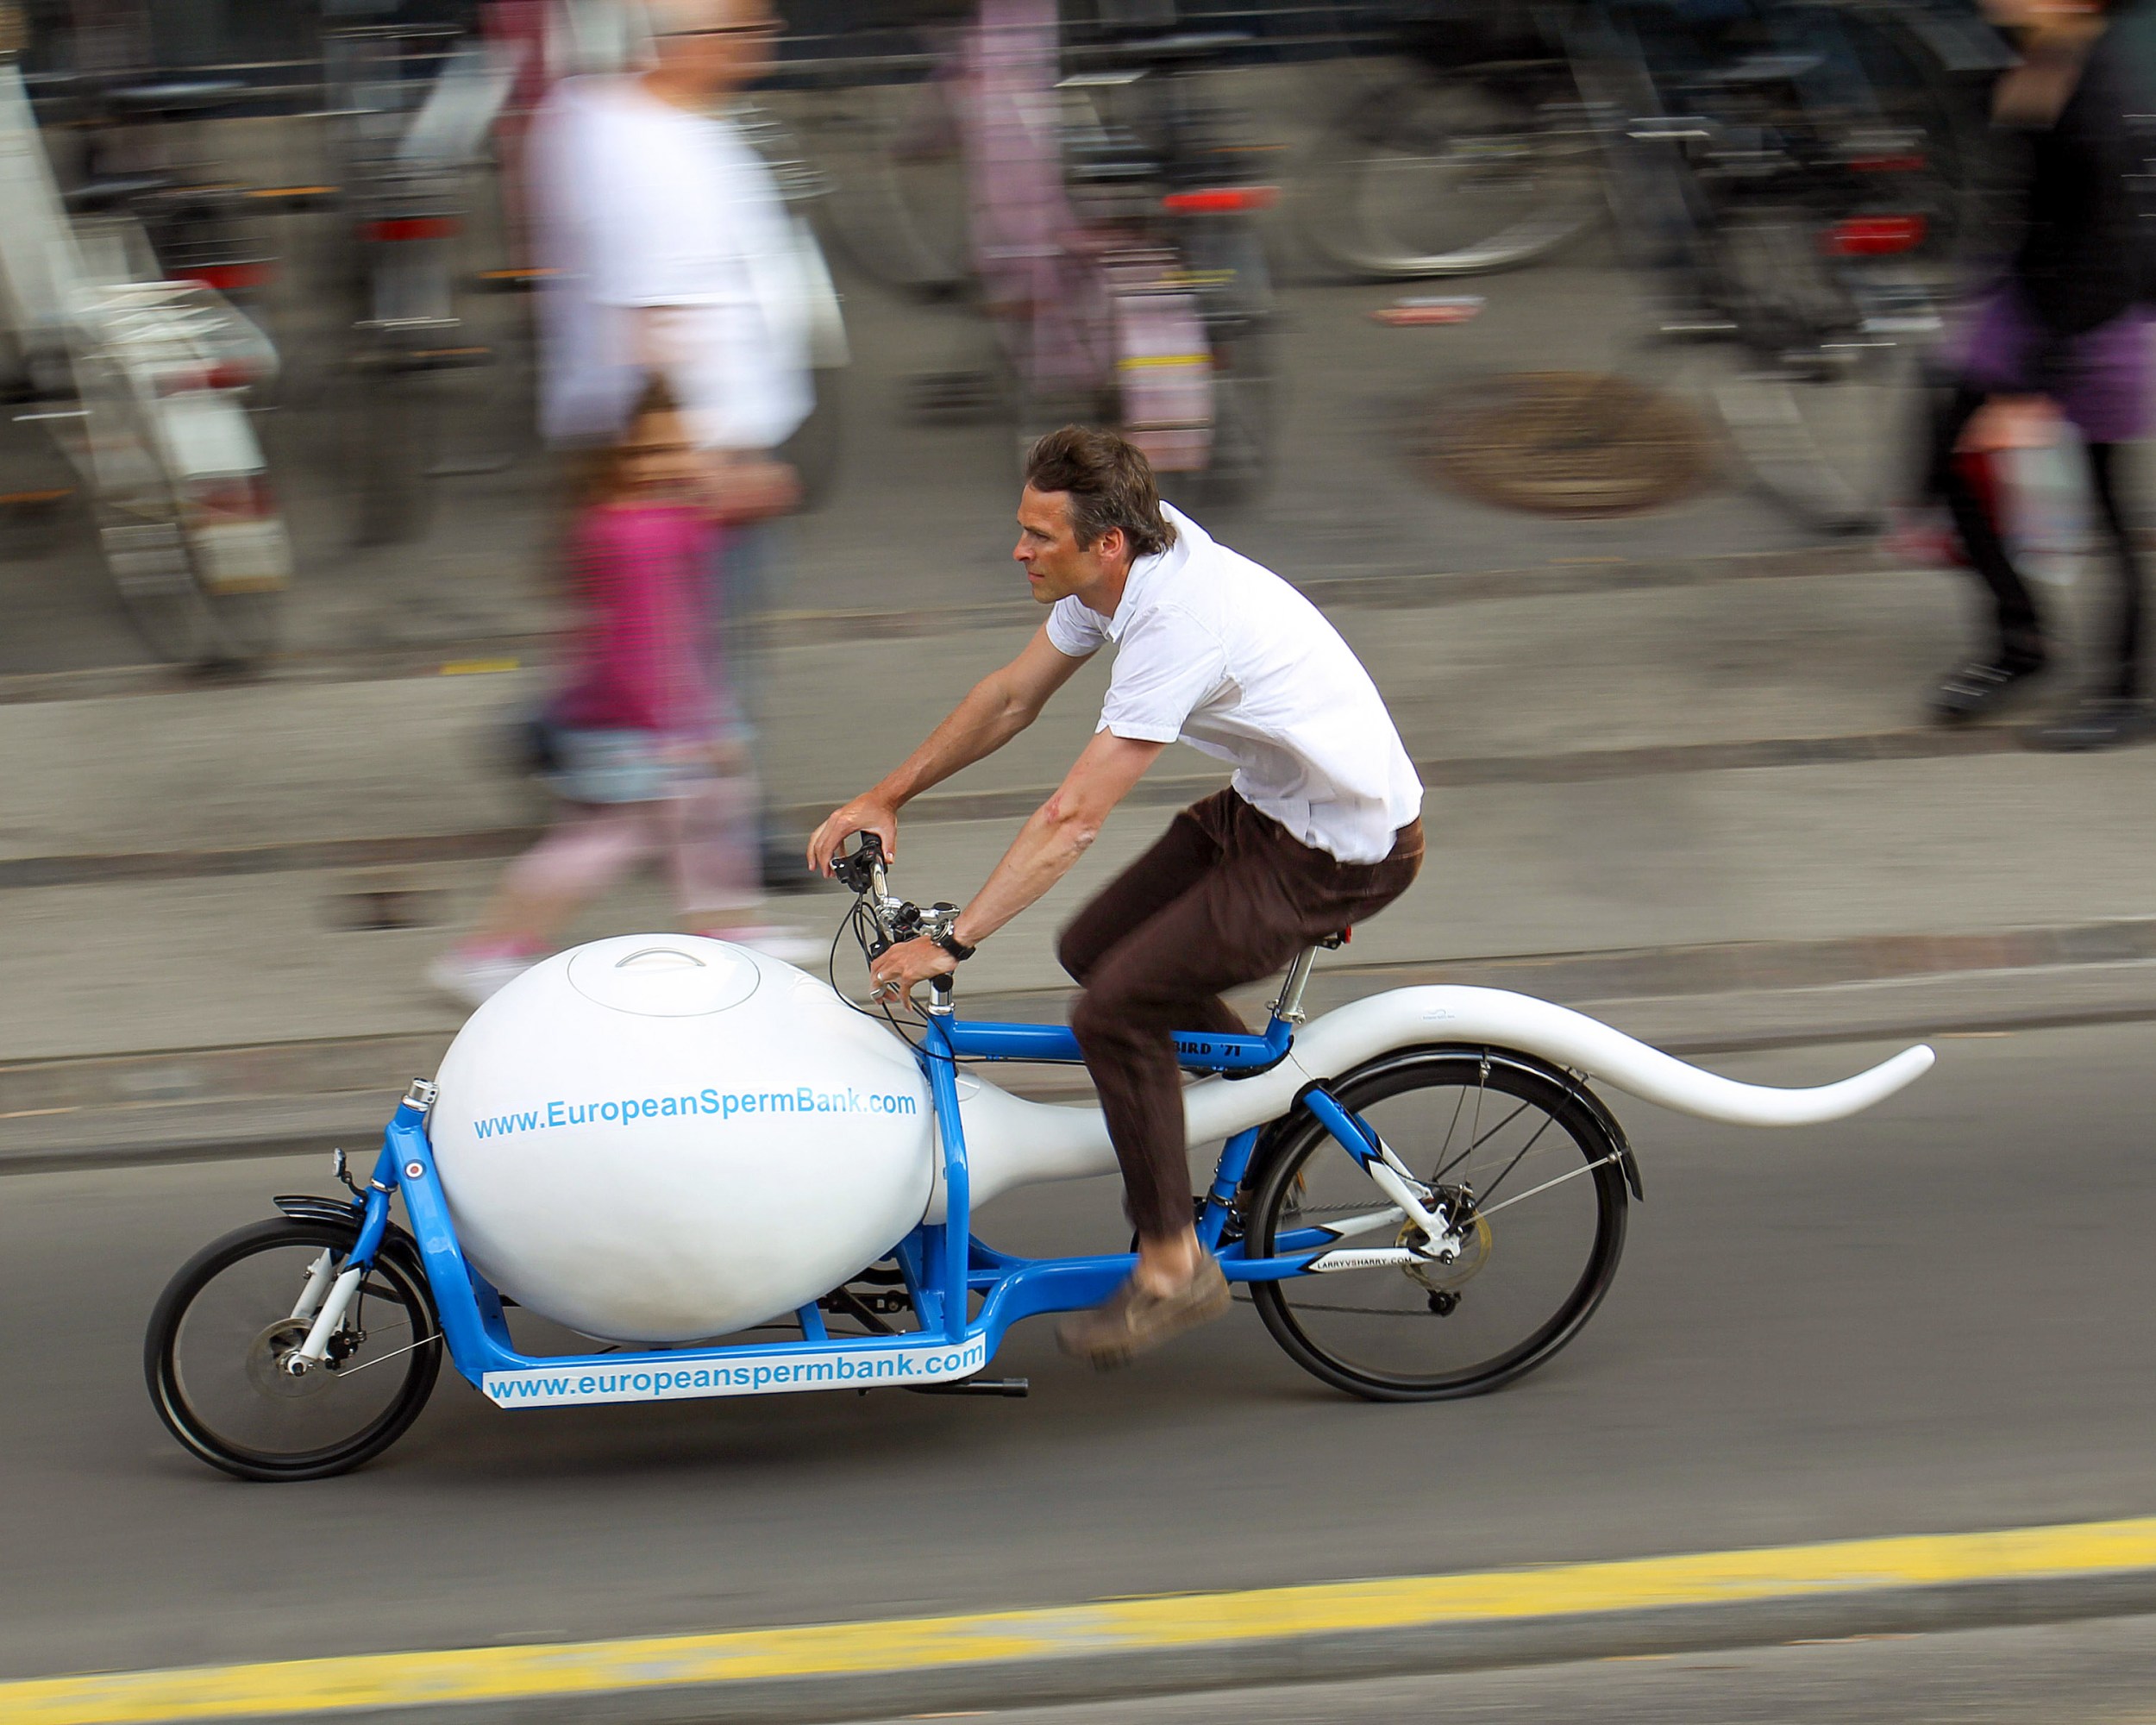 Courier on a bicycle shaped like sperm accelerating on the road